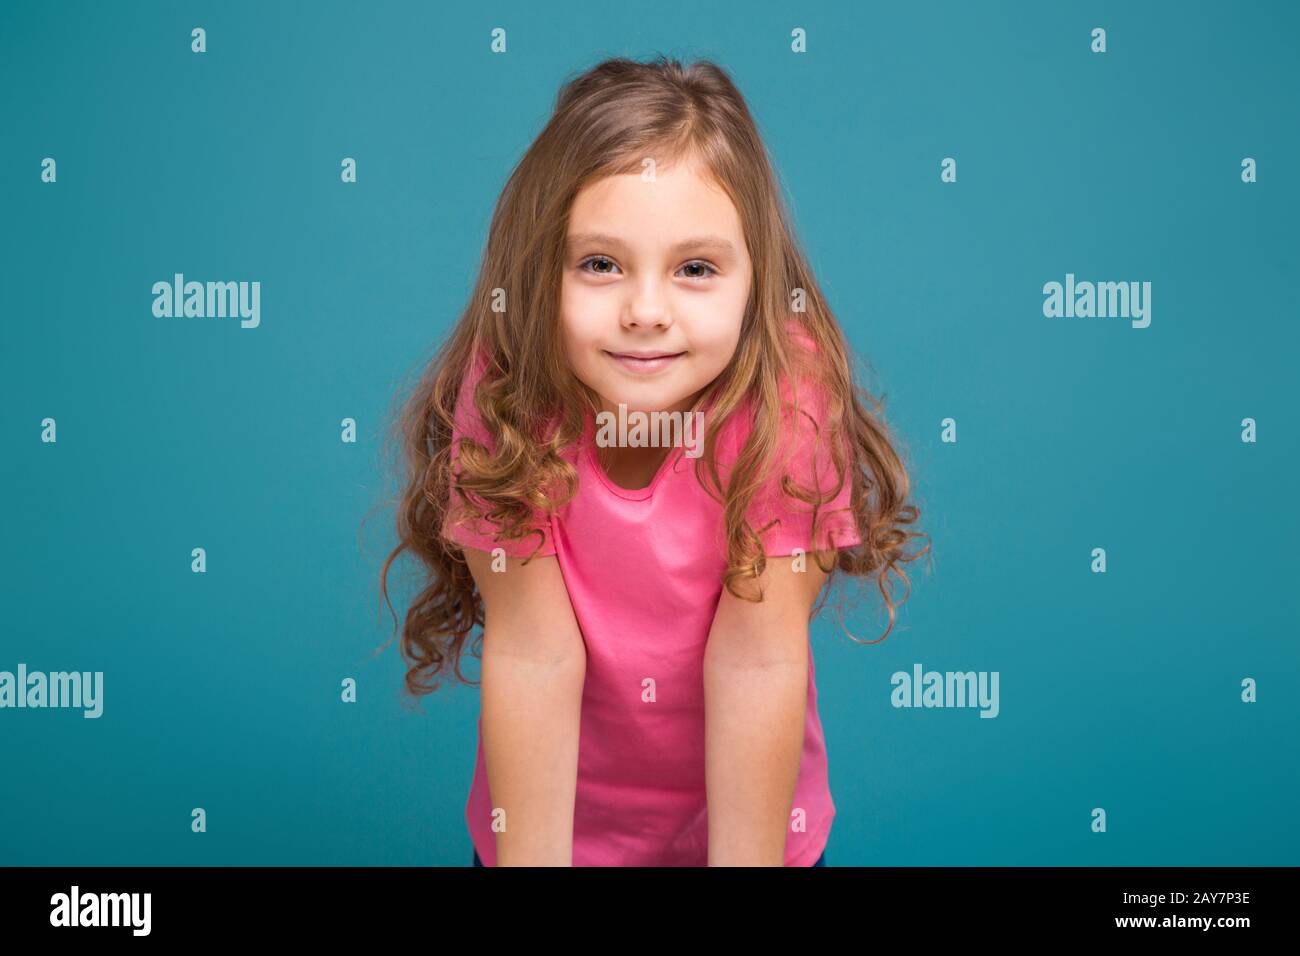 Pretty, little girl in tee shirt with brown hair Stock Photo